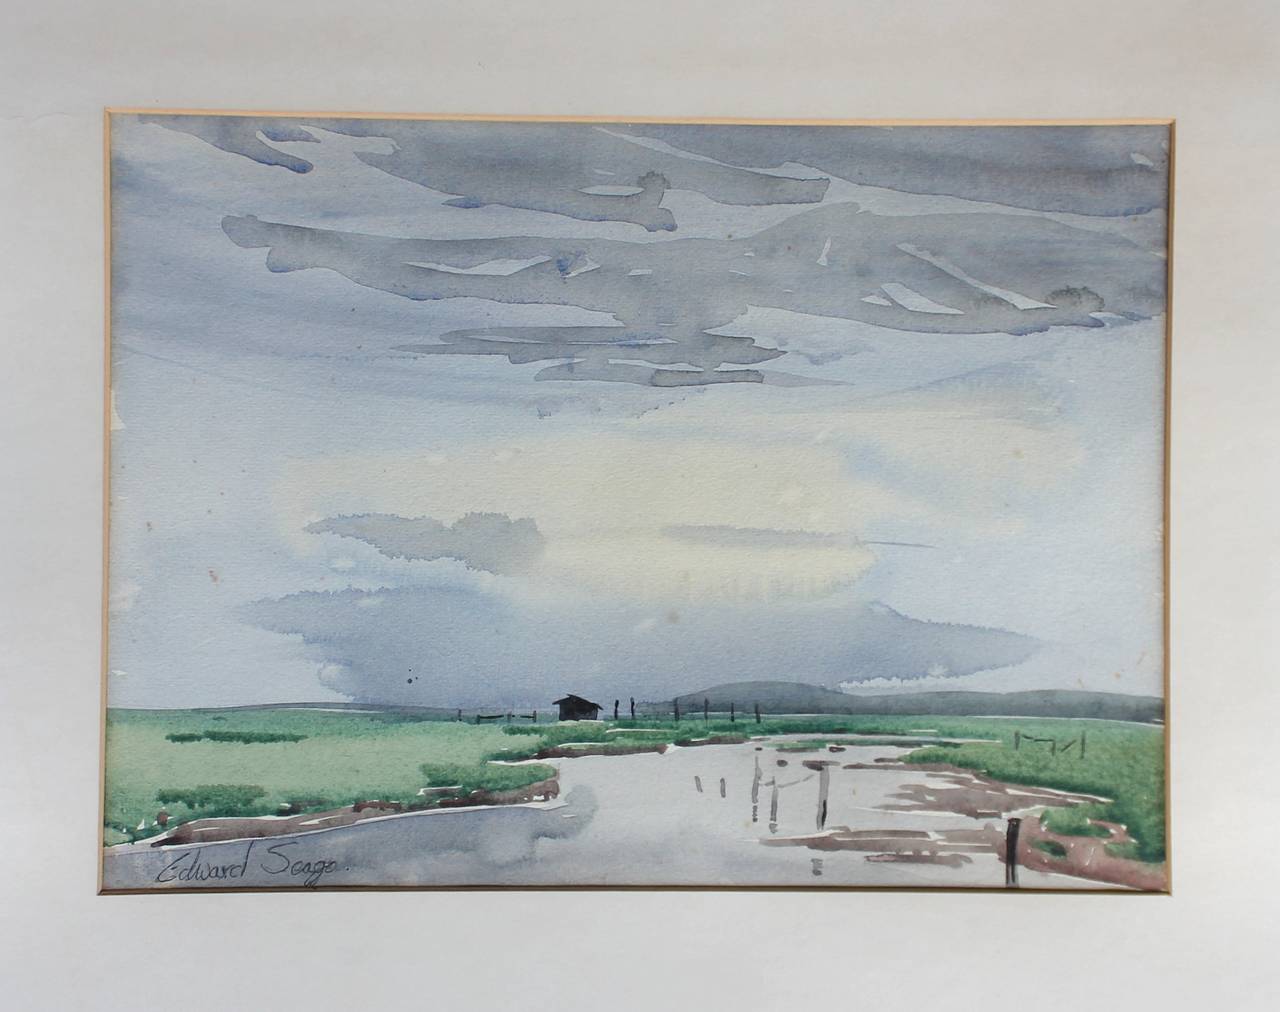 A watercolor by Edward Seago RWS, RBA (1910-1974).

Signed lower left and in its original painted frame. When taking it out of the frame, it has the recipients details in pencil on the reverse of the paper.

Measures: 37cm wide x 27cm high